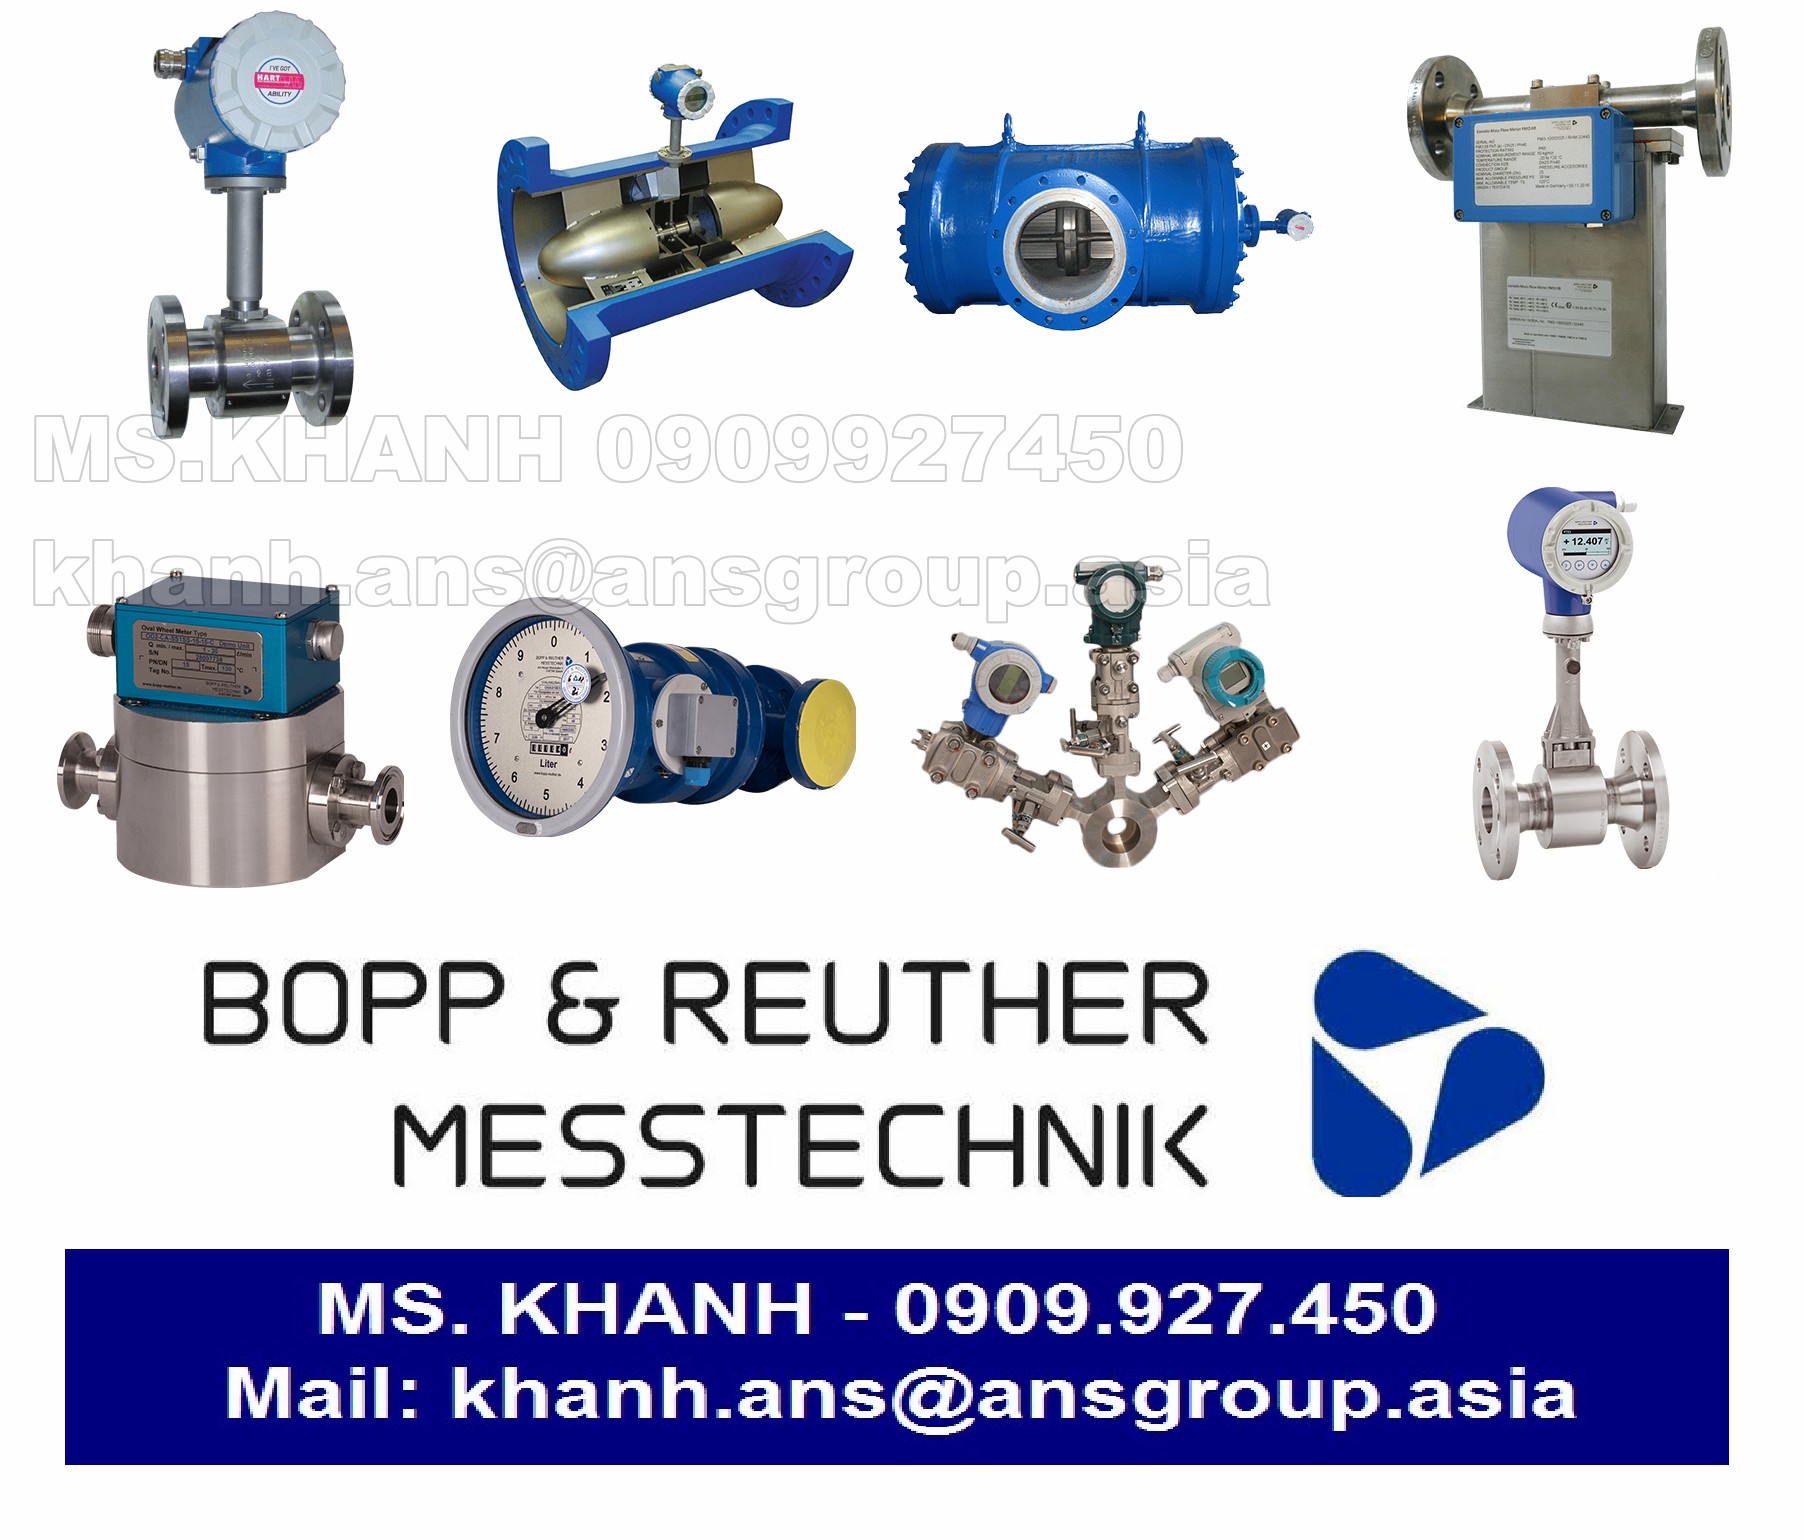 tua-bin-cua-thiet-bi-rq15ust-i-n-k-fs-d-c-0000-turbine-flow-transmitter-bopp-reuther.png